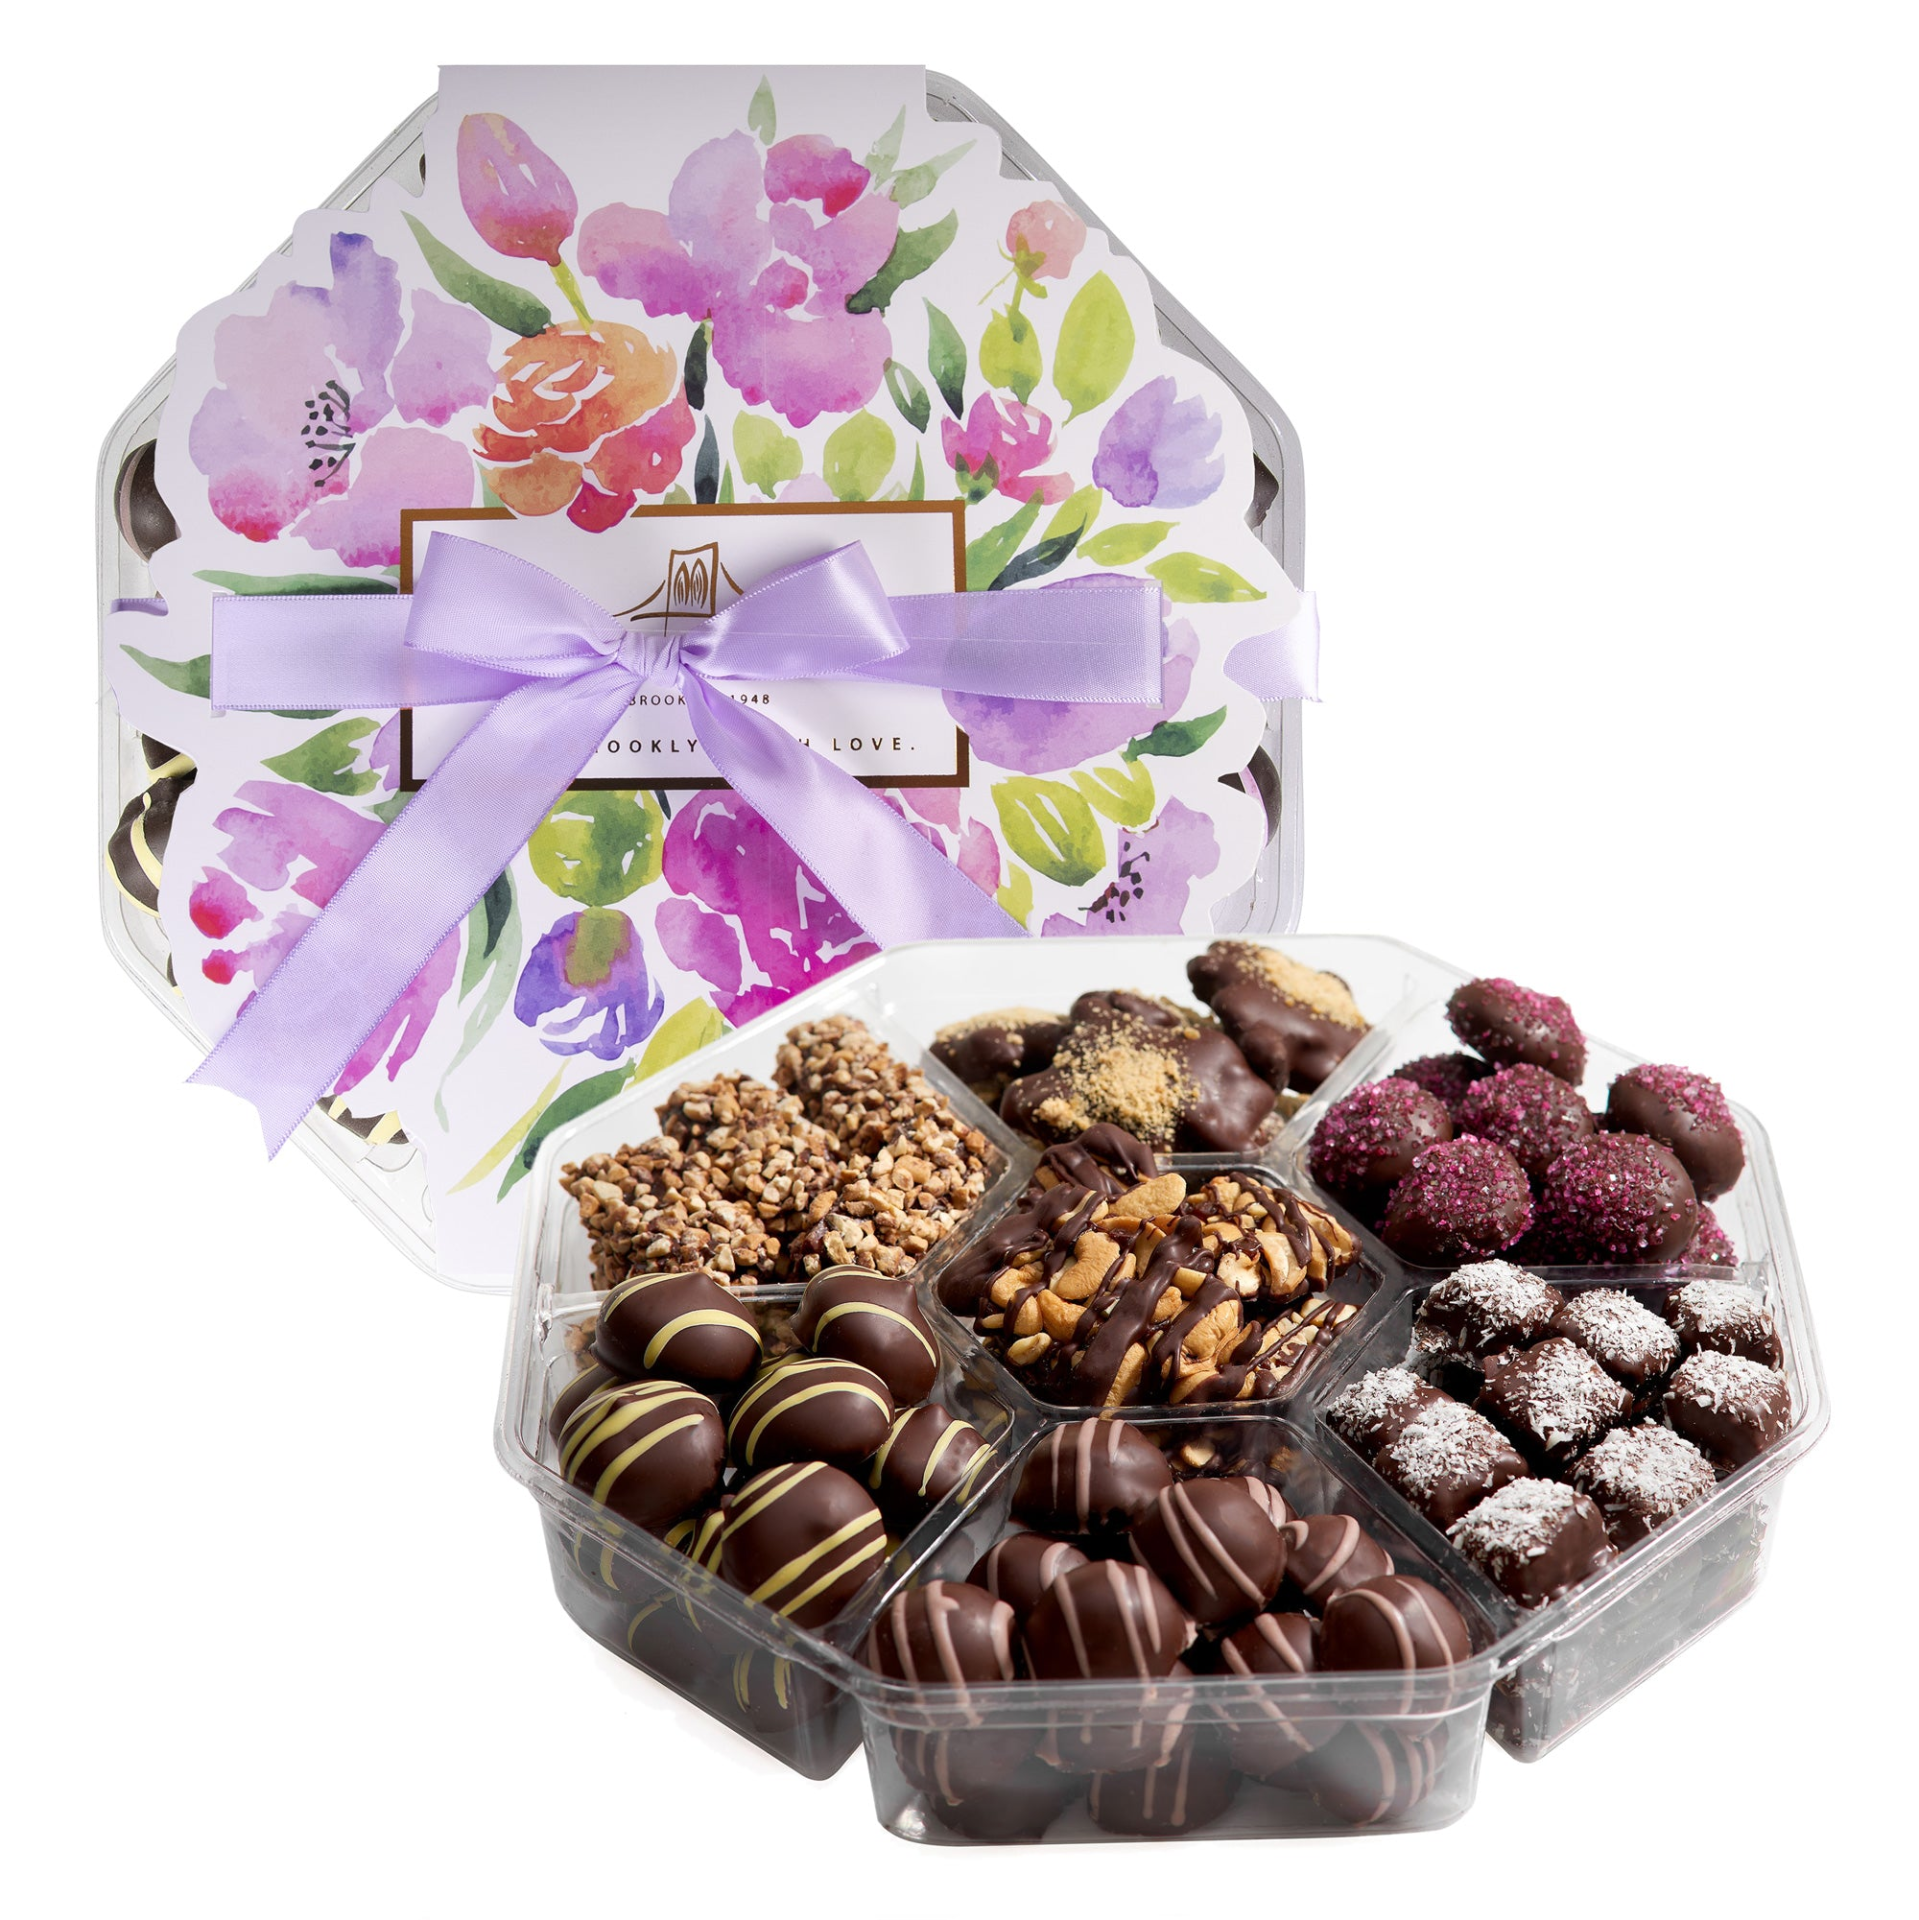 Kosher Dairy-Free Chocolate Assortment From Fames Chocolatier - A Mother's Day Gift